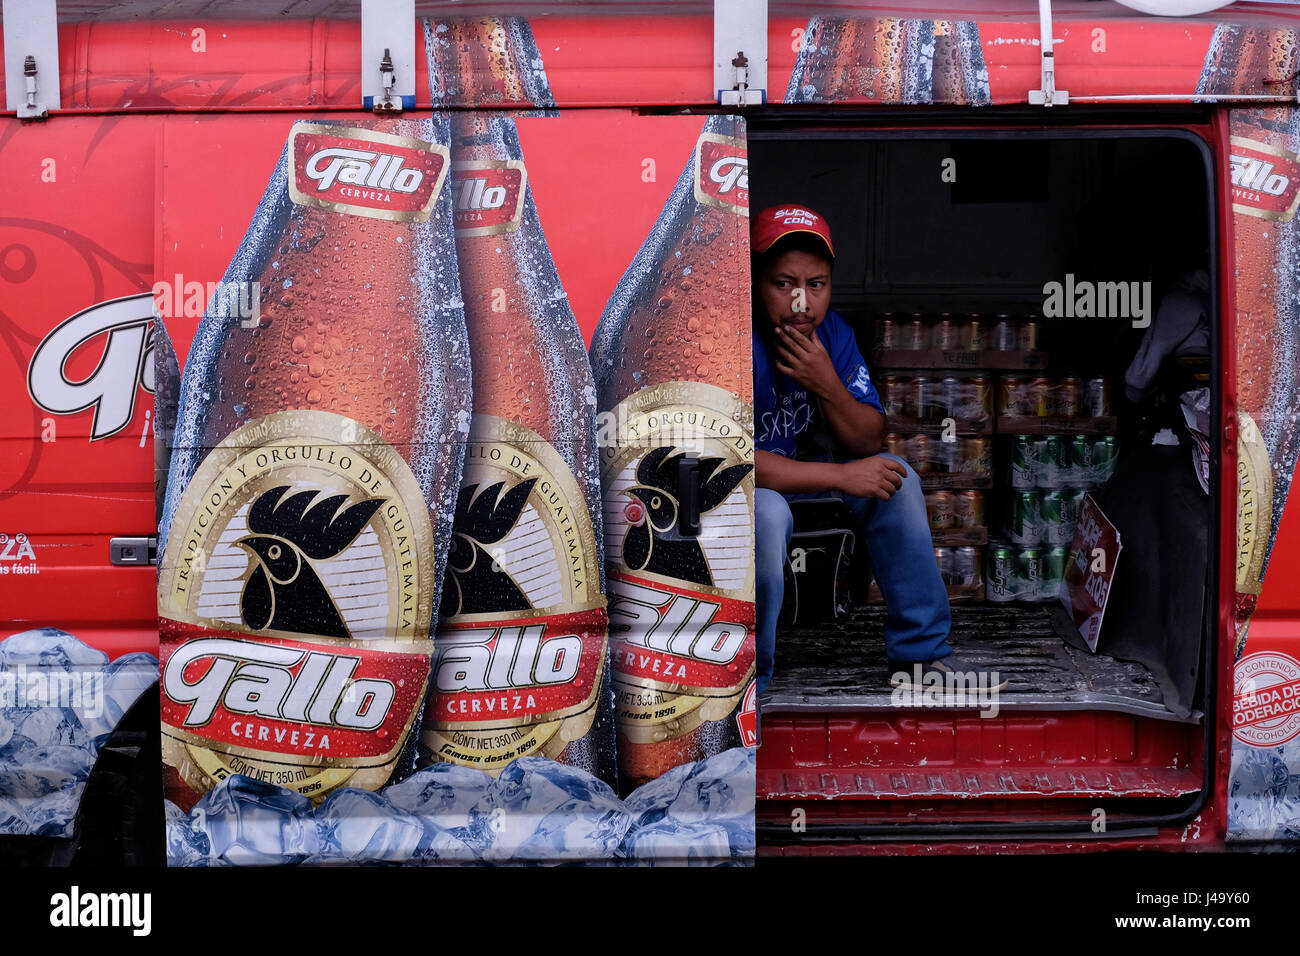 Man sitting in a transporter of Gallo Lager style beer brewed by Cerveceia Centro Americana in Guatemala city Stock Photo